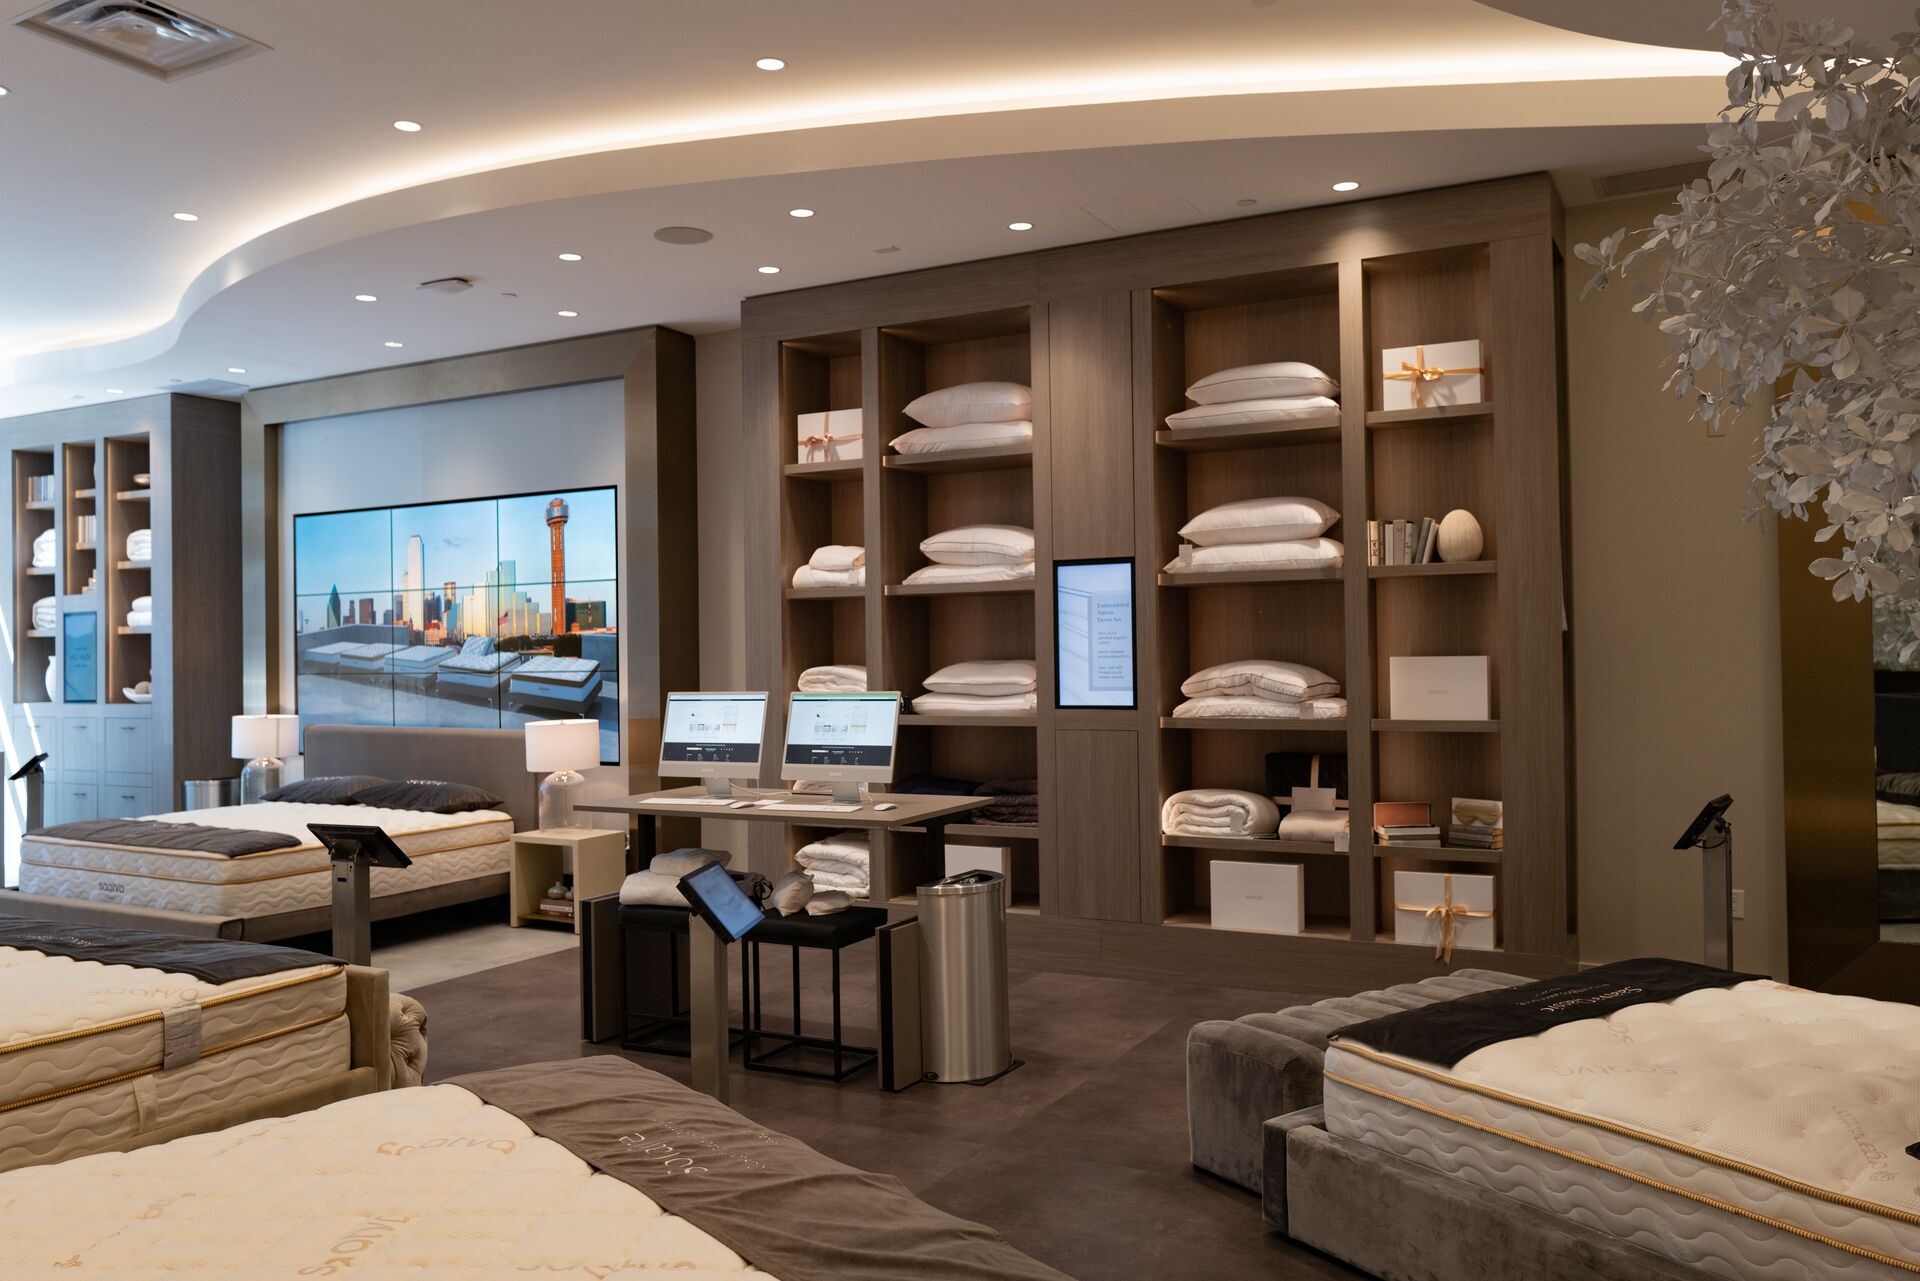 Saatva Dallas' digitally-supported bedding accessories area and self-checkout stations